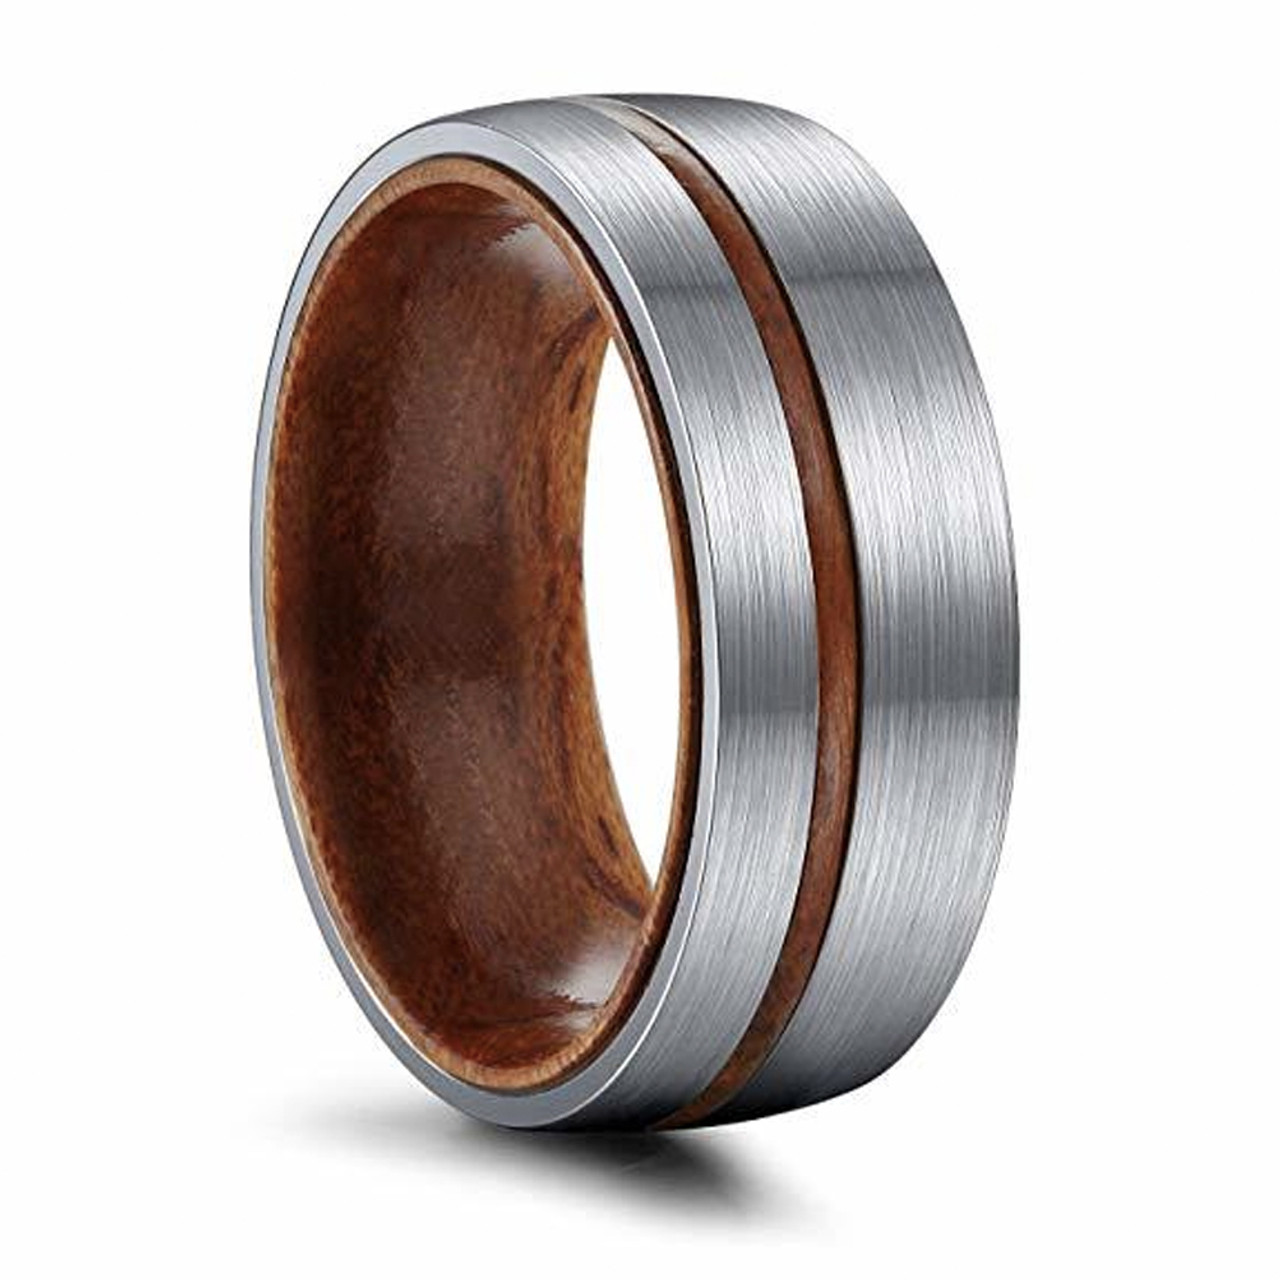 (8mm)  Unisex or Men's Titanium Wedding ring bands. Brushed Silver Tone Ring with Thin Striped Dark Wood Inlay and Smooth Wood Inside Band. Domed Light Weight Ring.